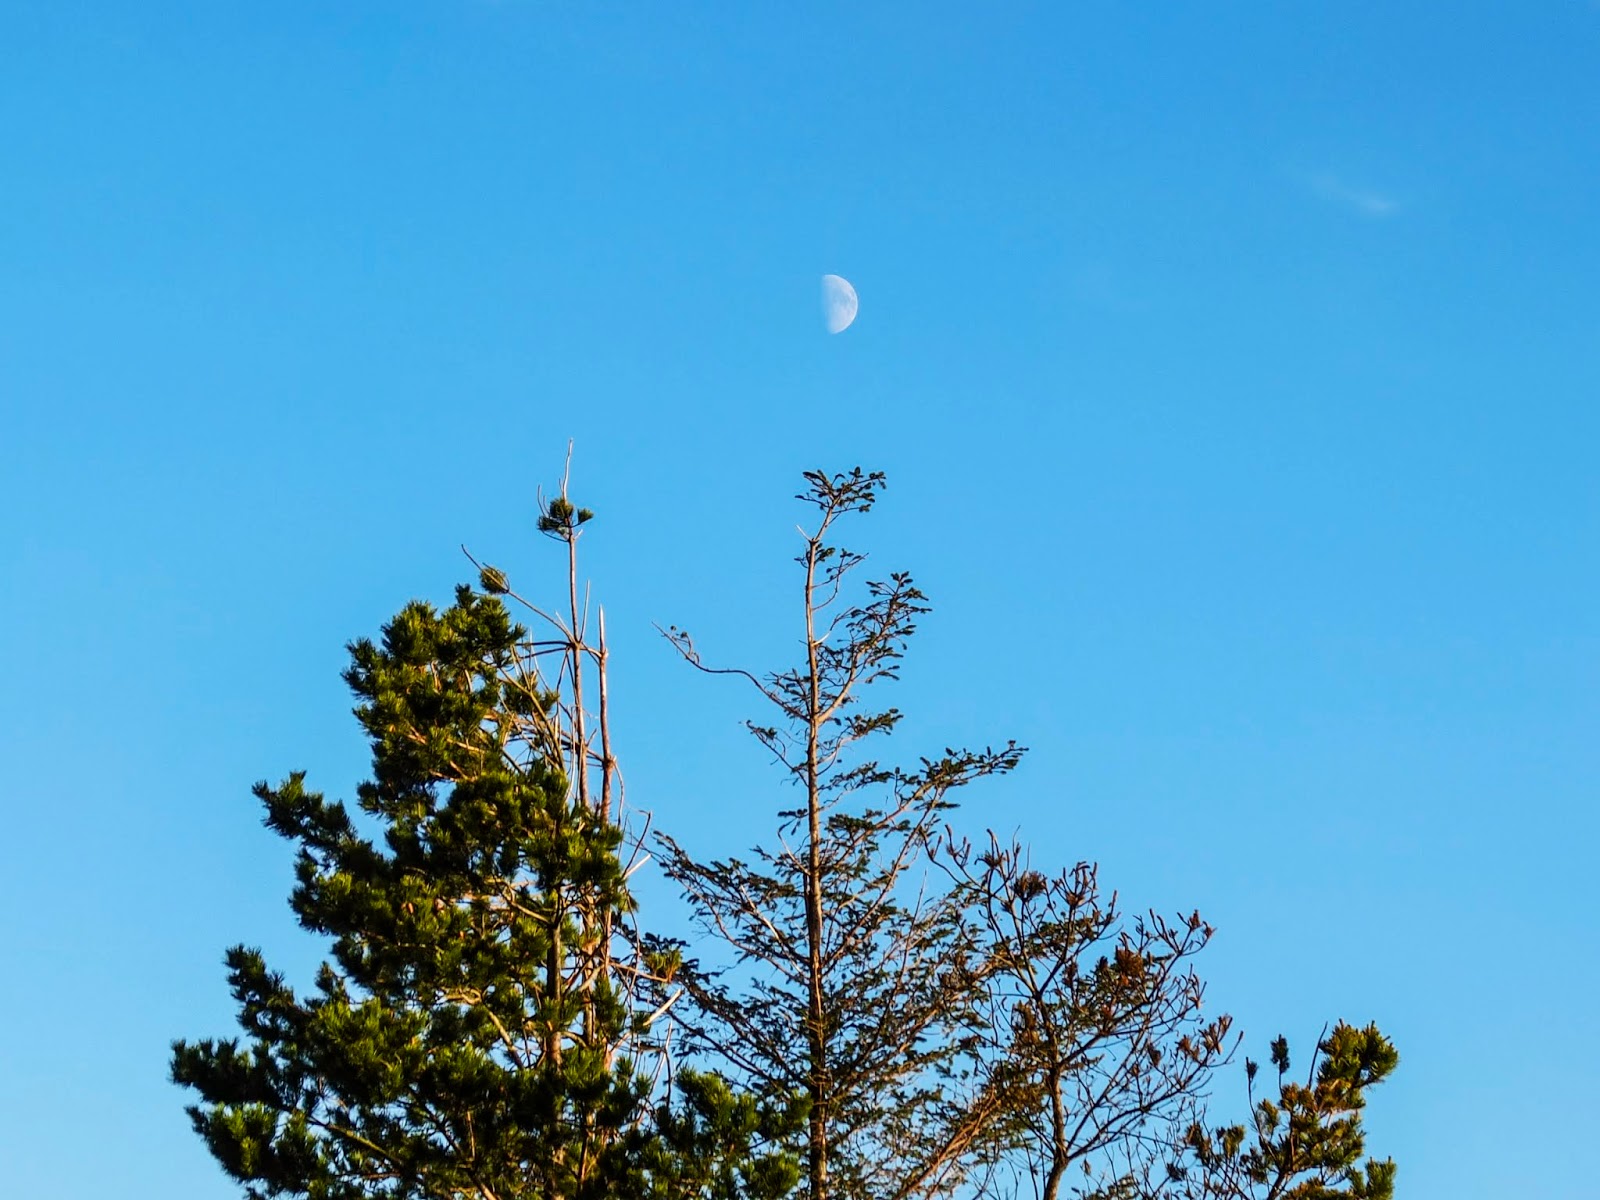 Half a moon above a tree that is half covered in pine branches.